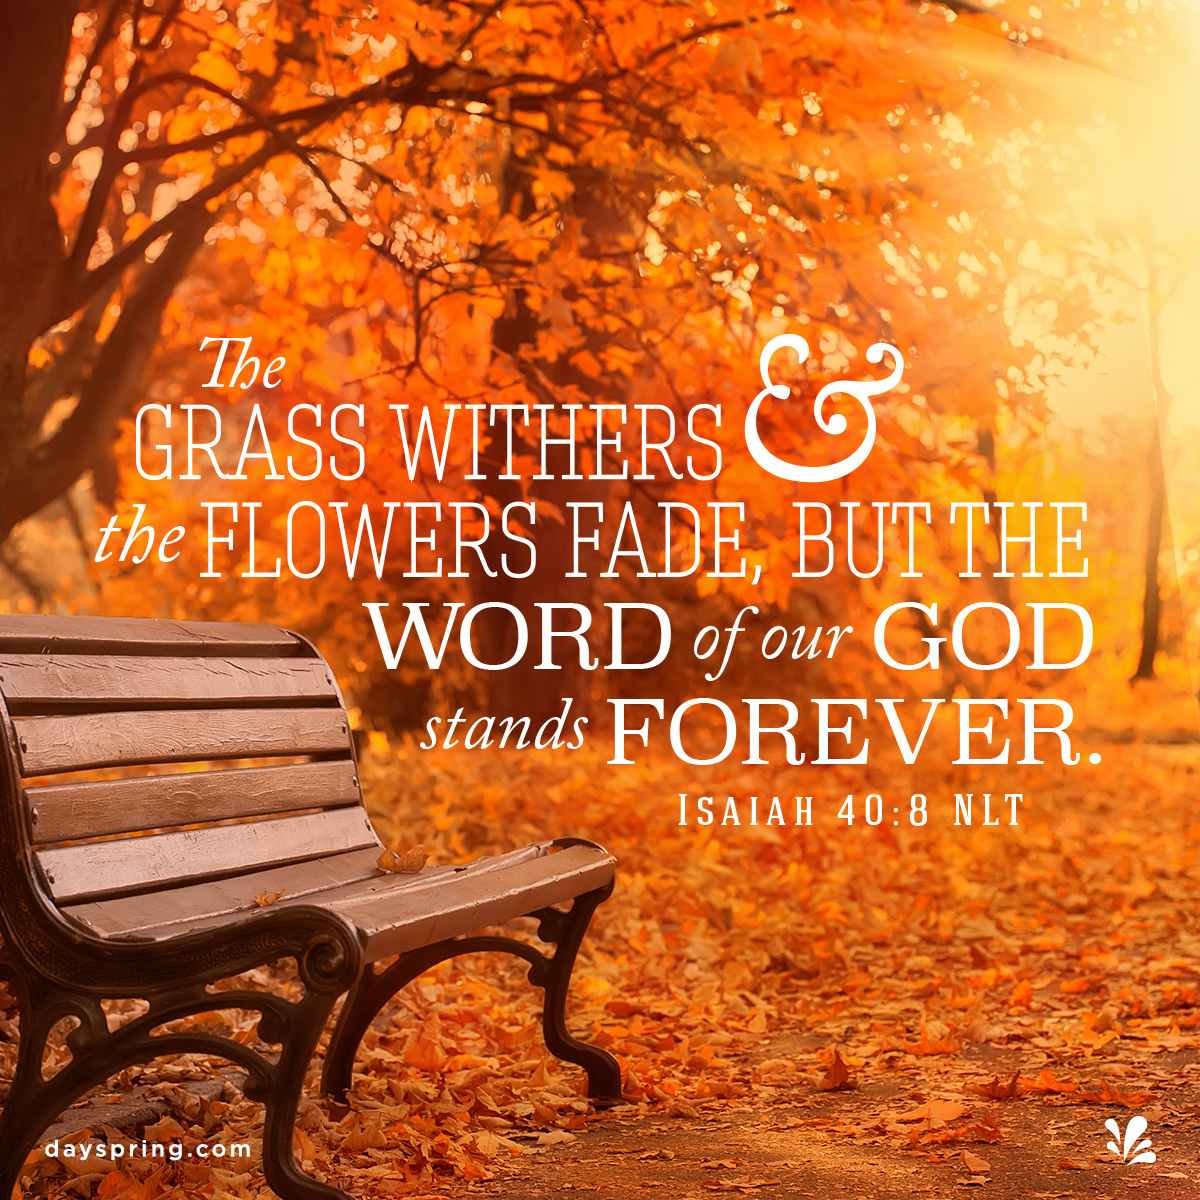 'Tbe GRASS WITHERS (I the FLOWERS FADE, BUT THE WORD of our GOD stands FOREVER ISAIAH 40 : 8 NLT dayspring com